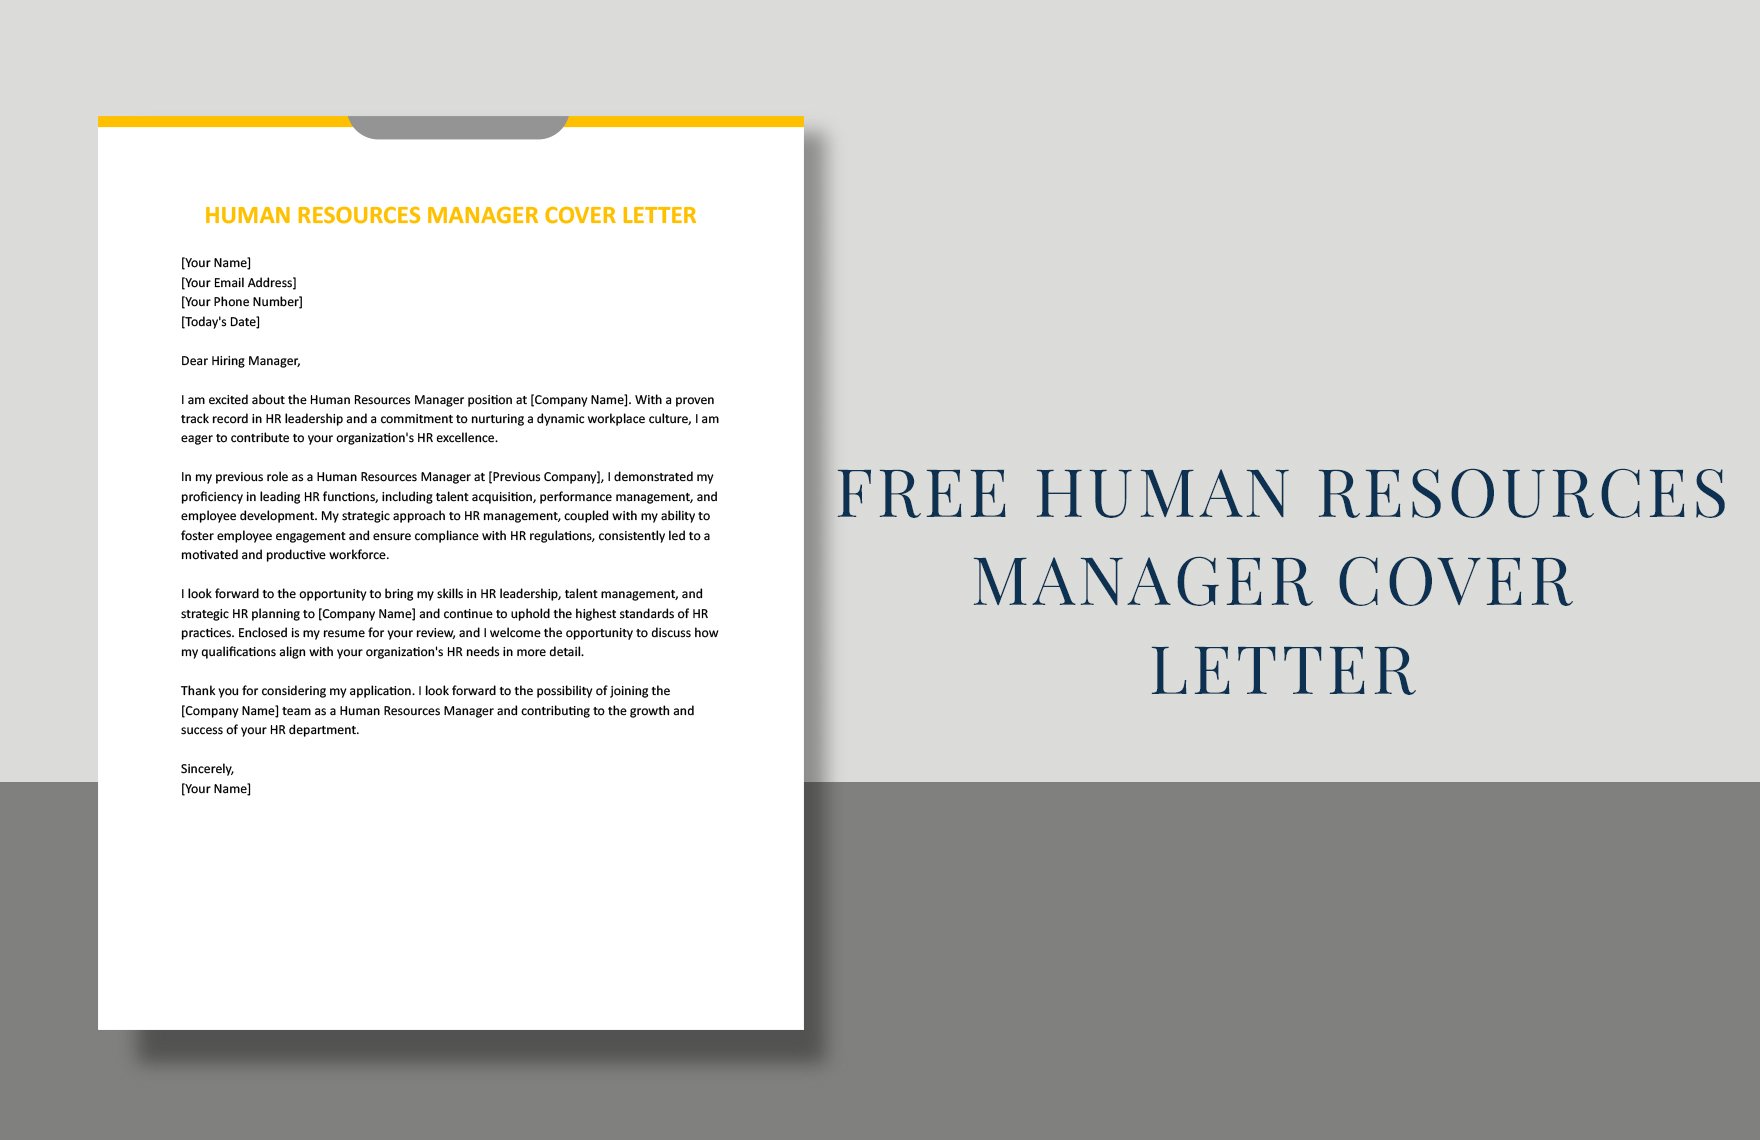 Human Resources Manager Cover Letter in Word, Google Docs